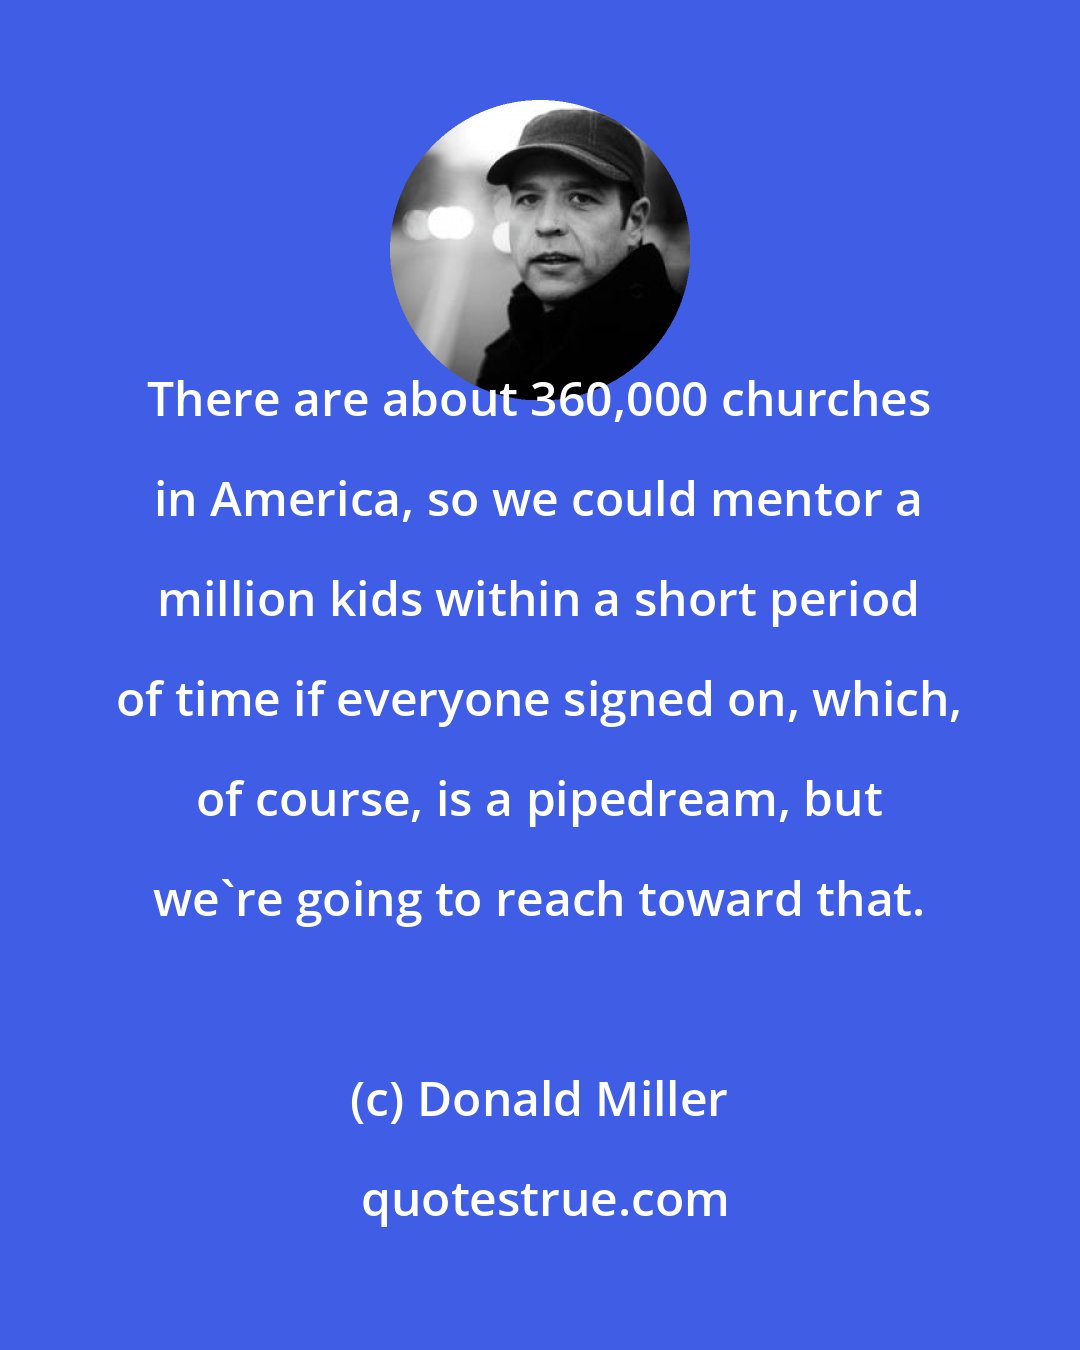 Donald Miller: There are about 360,000 churches in America, so we could mentor a million kids within a short period of time if everyone signed on, which, of course, is a pipedream, but we're going to reach toward that.